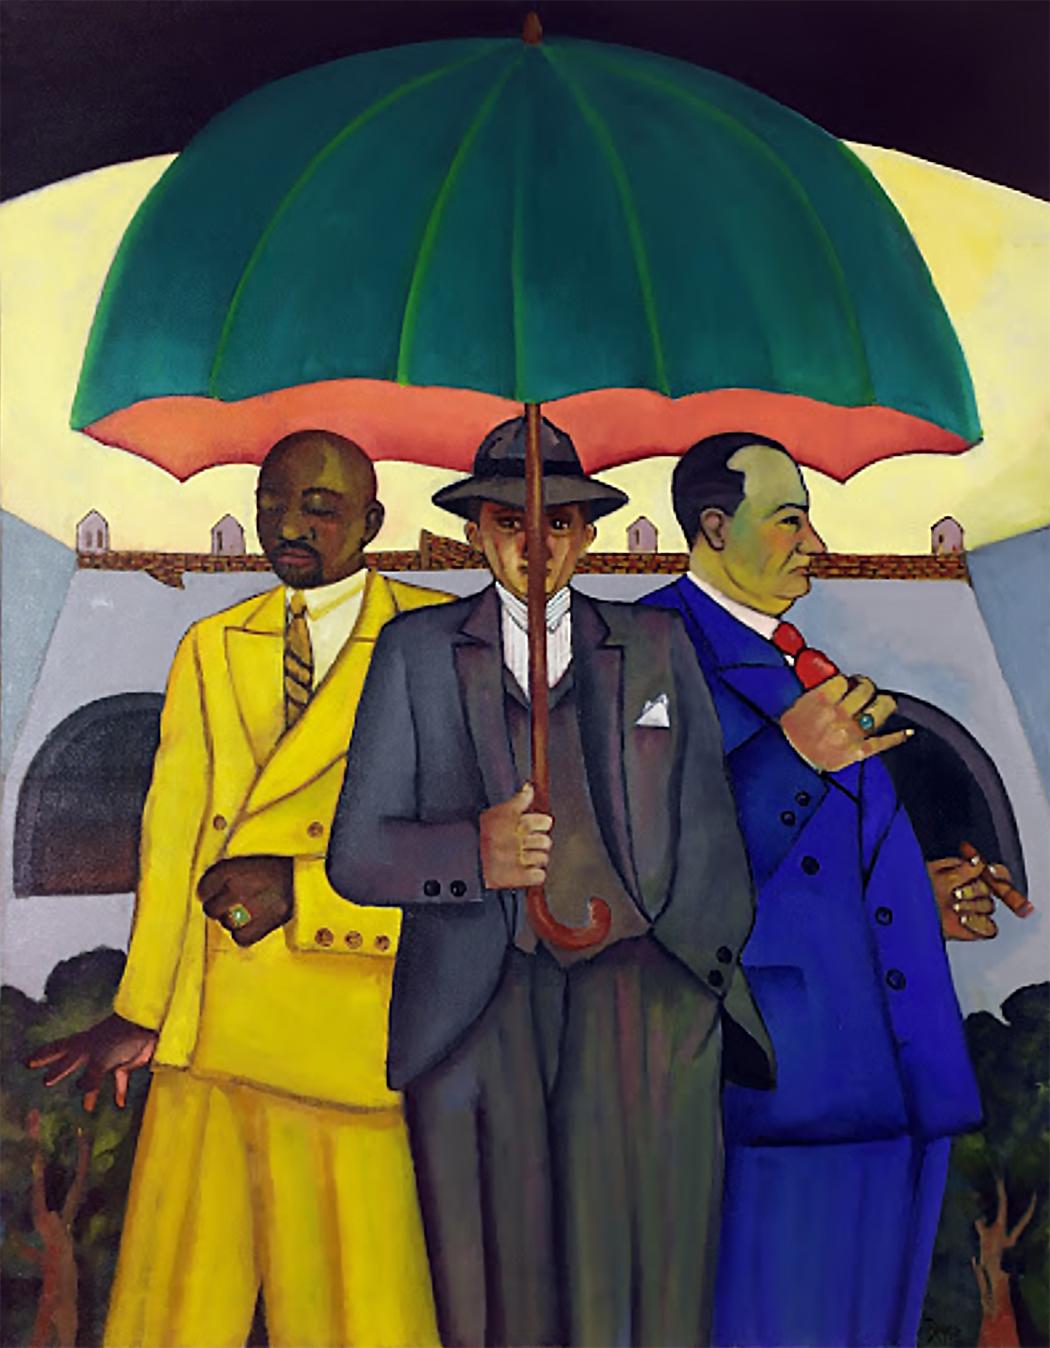 Trio in Rio, bright color oil painting of figure umbrella men in suits - Painting by Stephen Basso